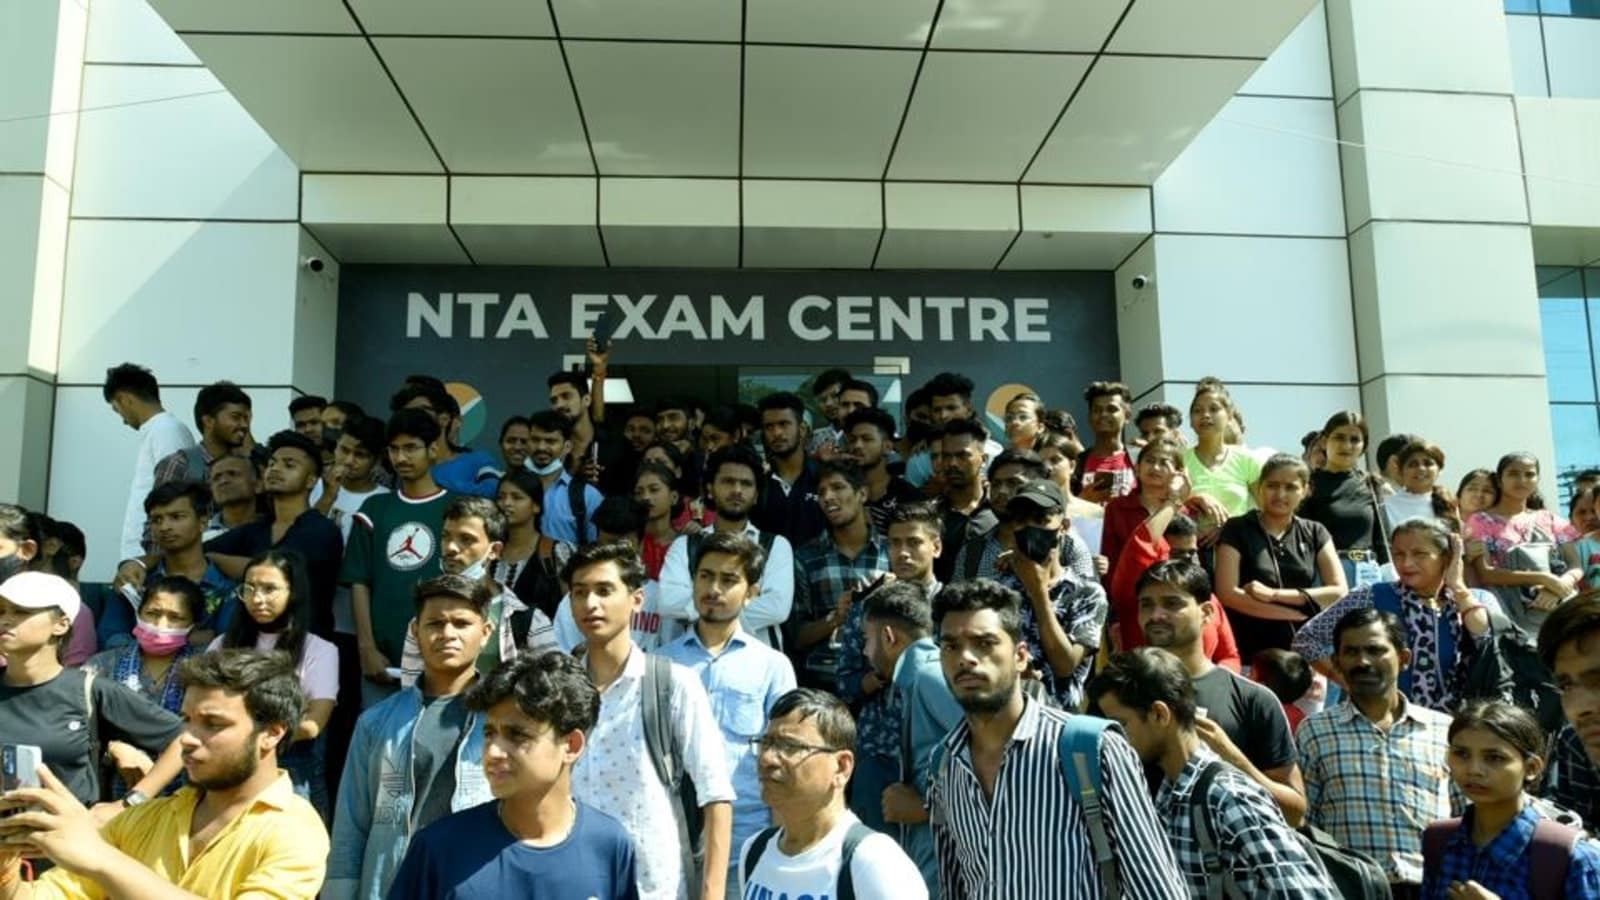 CUET UG: 8 instances when India’s 2nd largest entrance test was hit by glitches | Competitive Exams